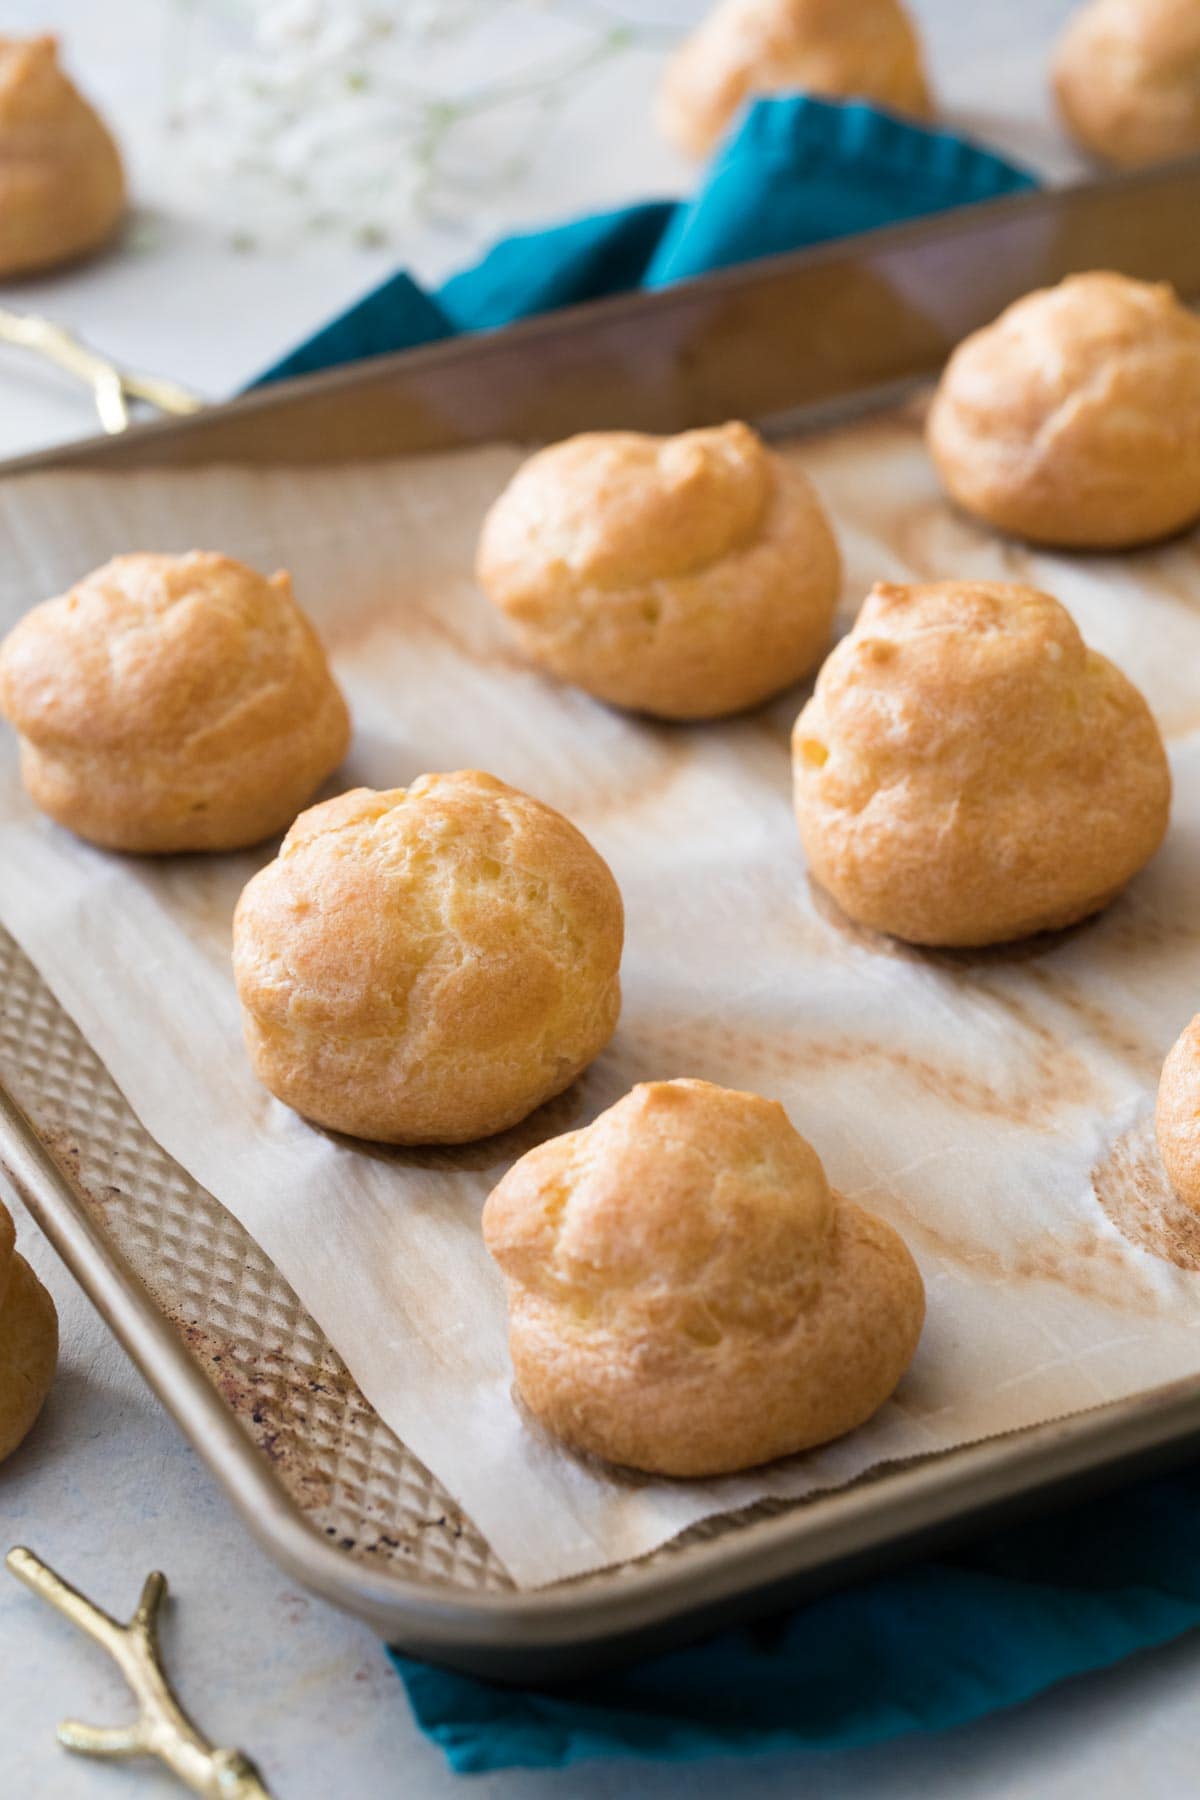 Choux buns after baking on a parchment lined baking sheet.